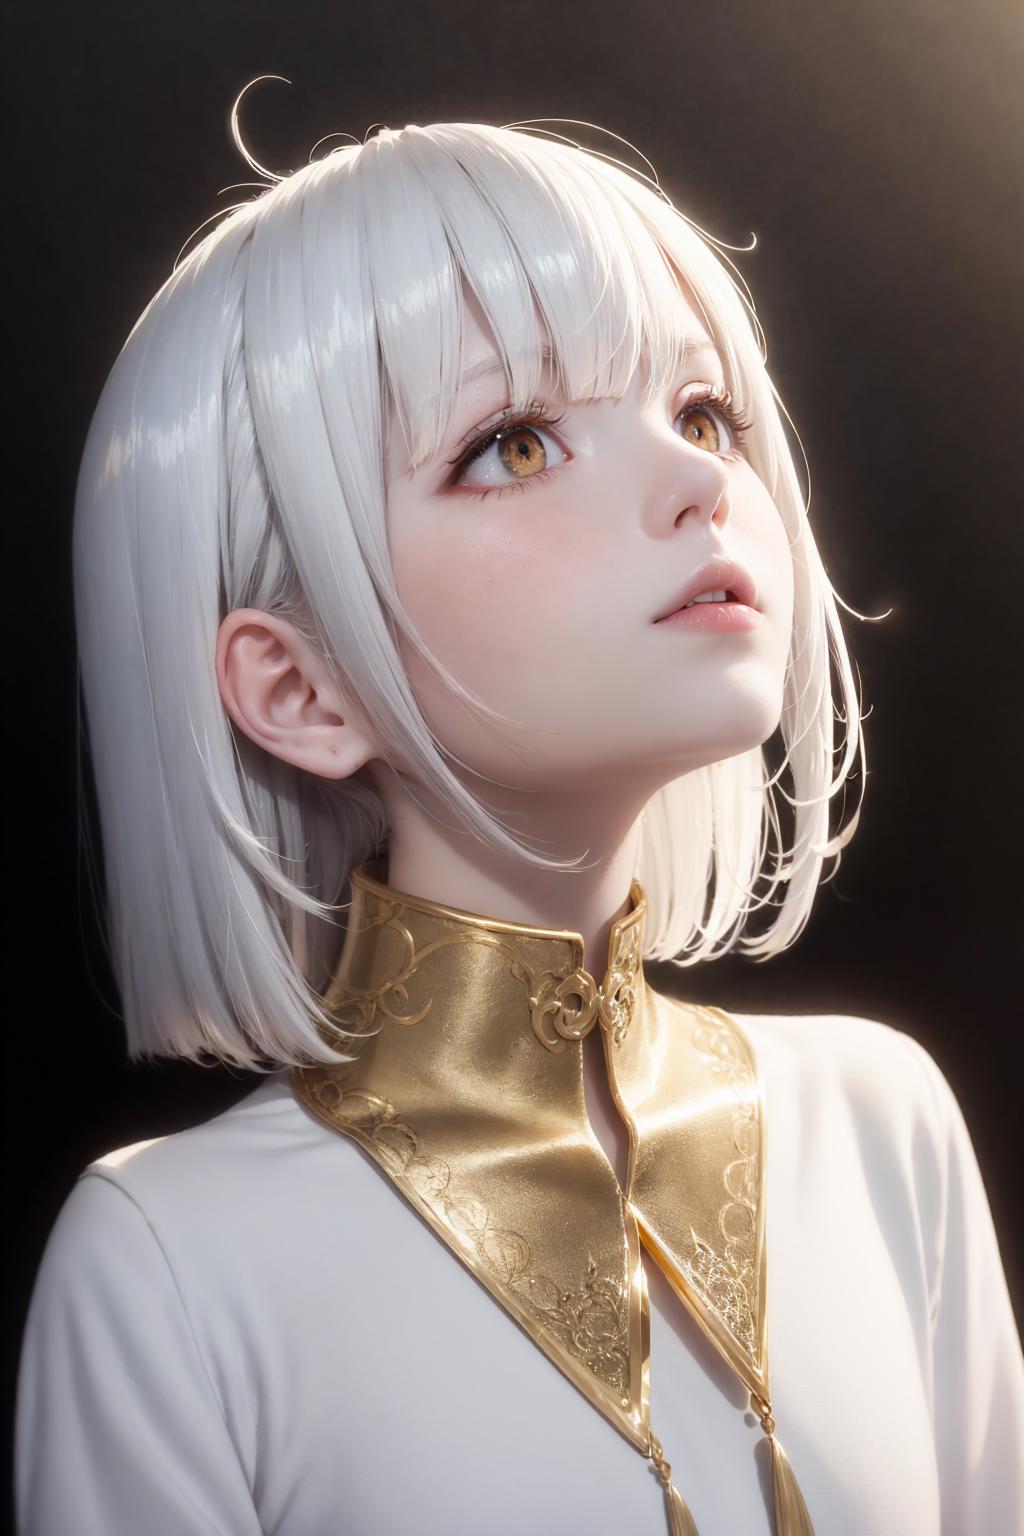 A young girl with white hair and a gold necklace looking up.